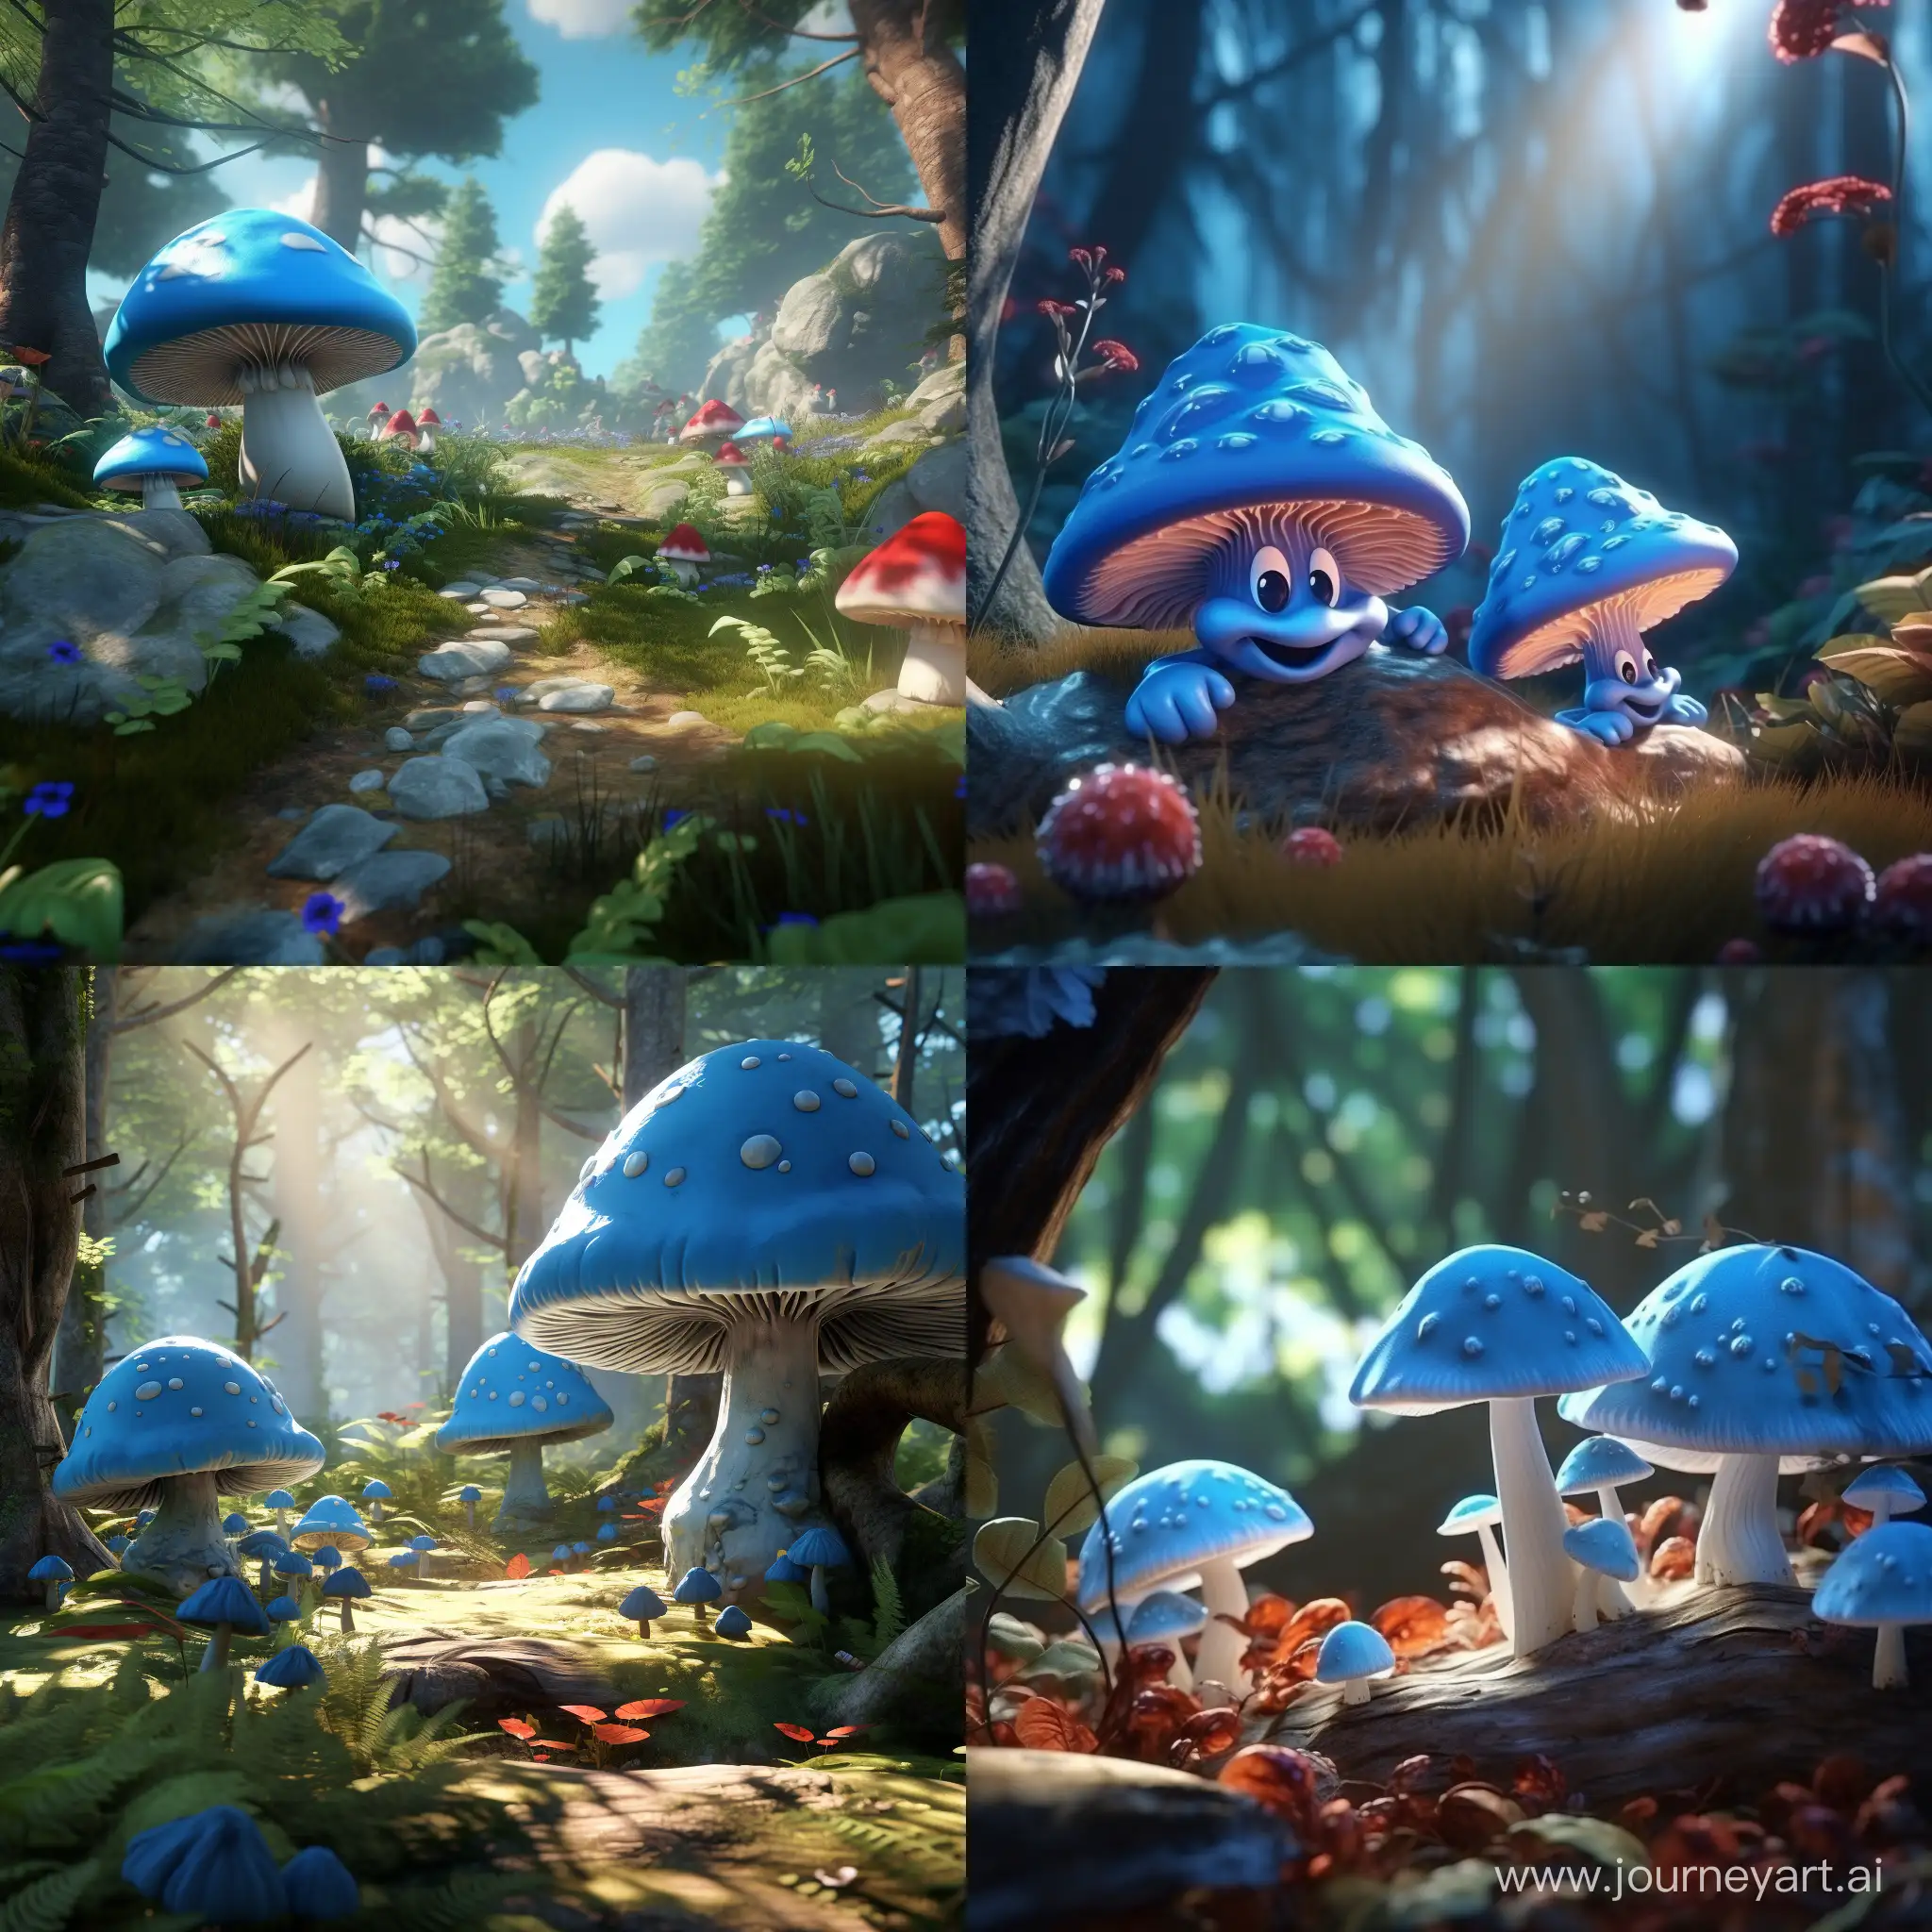 Enchanting-3D-Animation-Smurf-Mushrooms-in-a-Magical-Forest